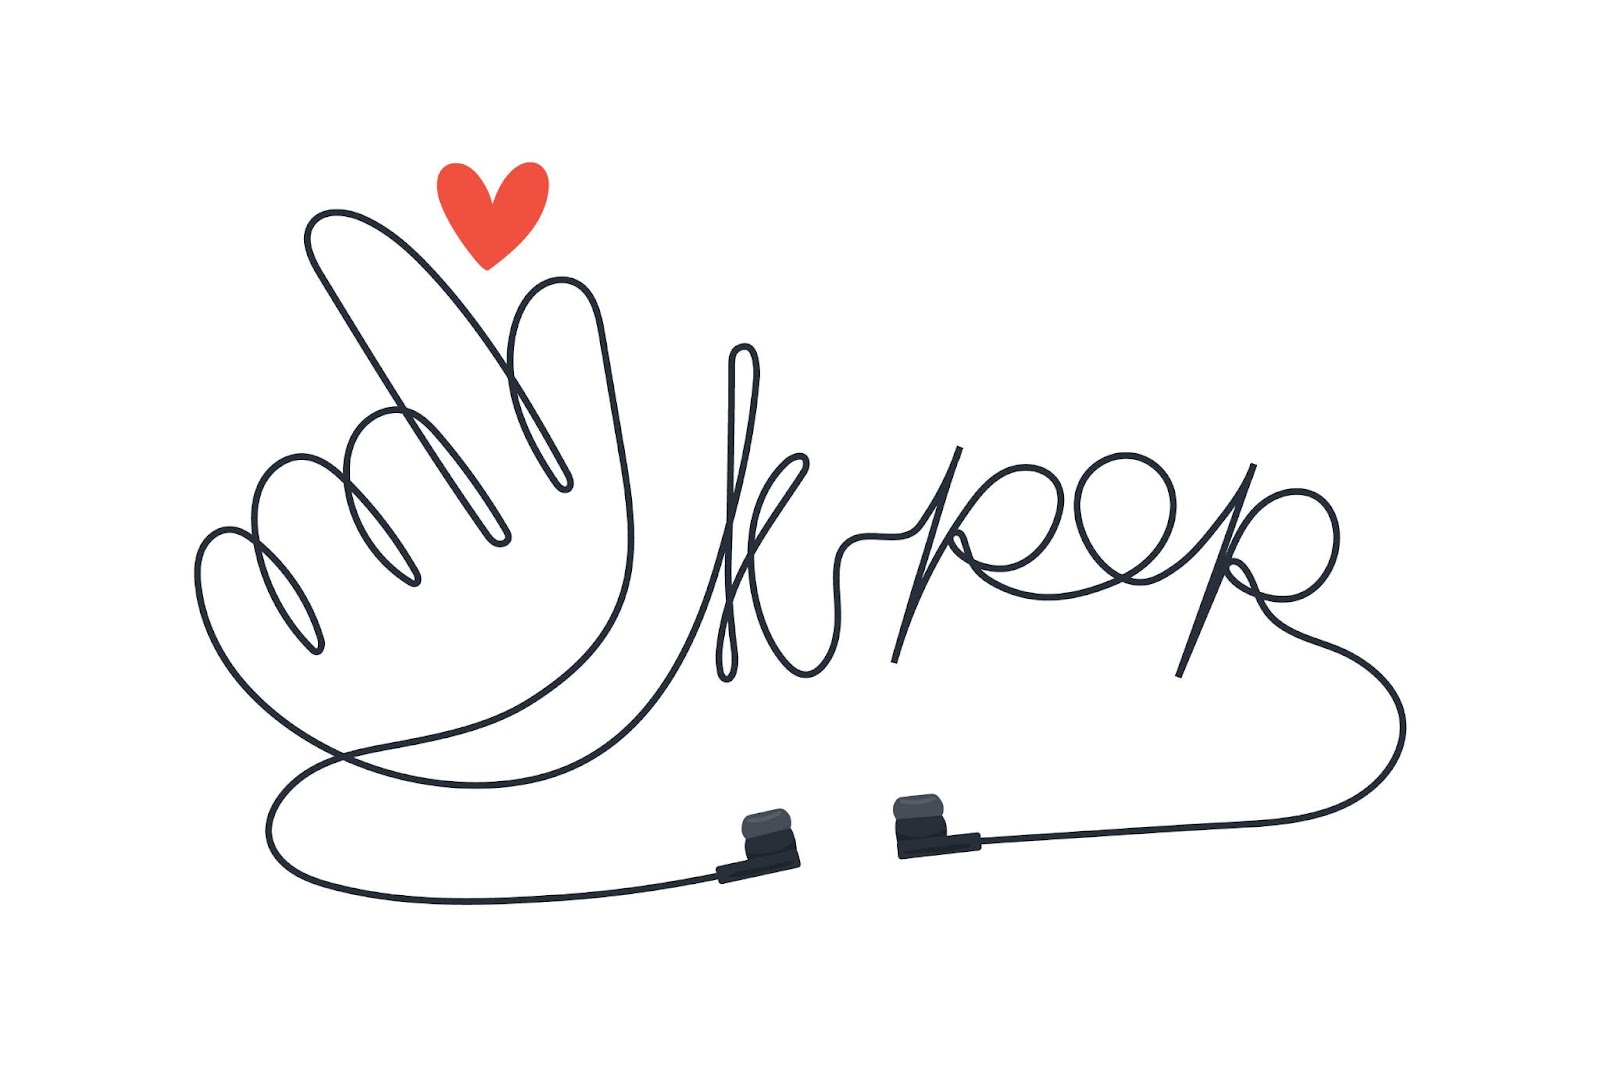 An image of an ear bud chord shaped in fingers making the heart symbol and spelling the word kpop